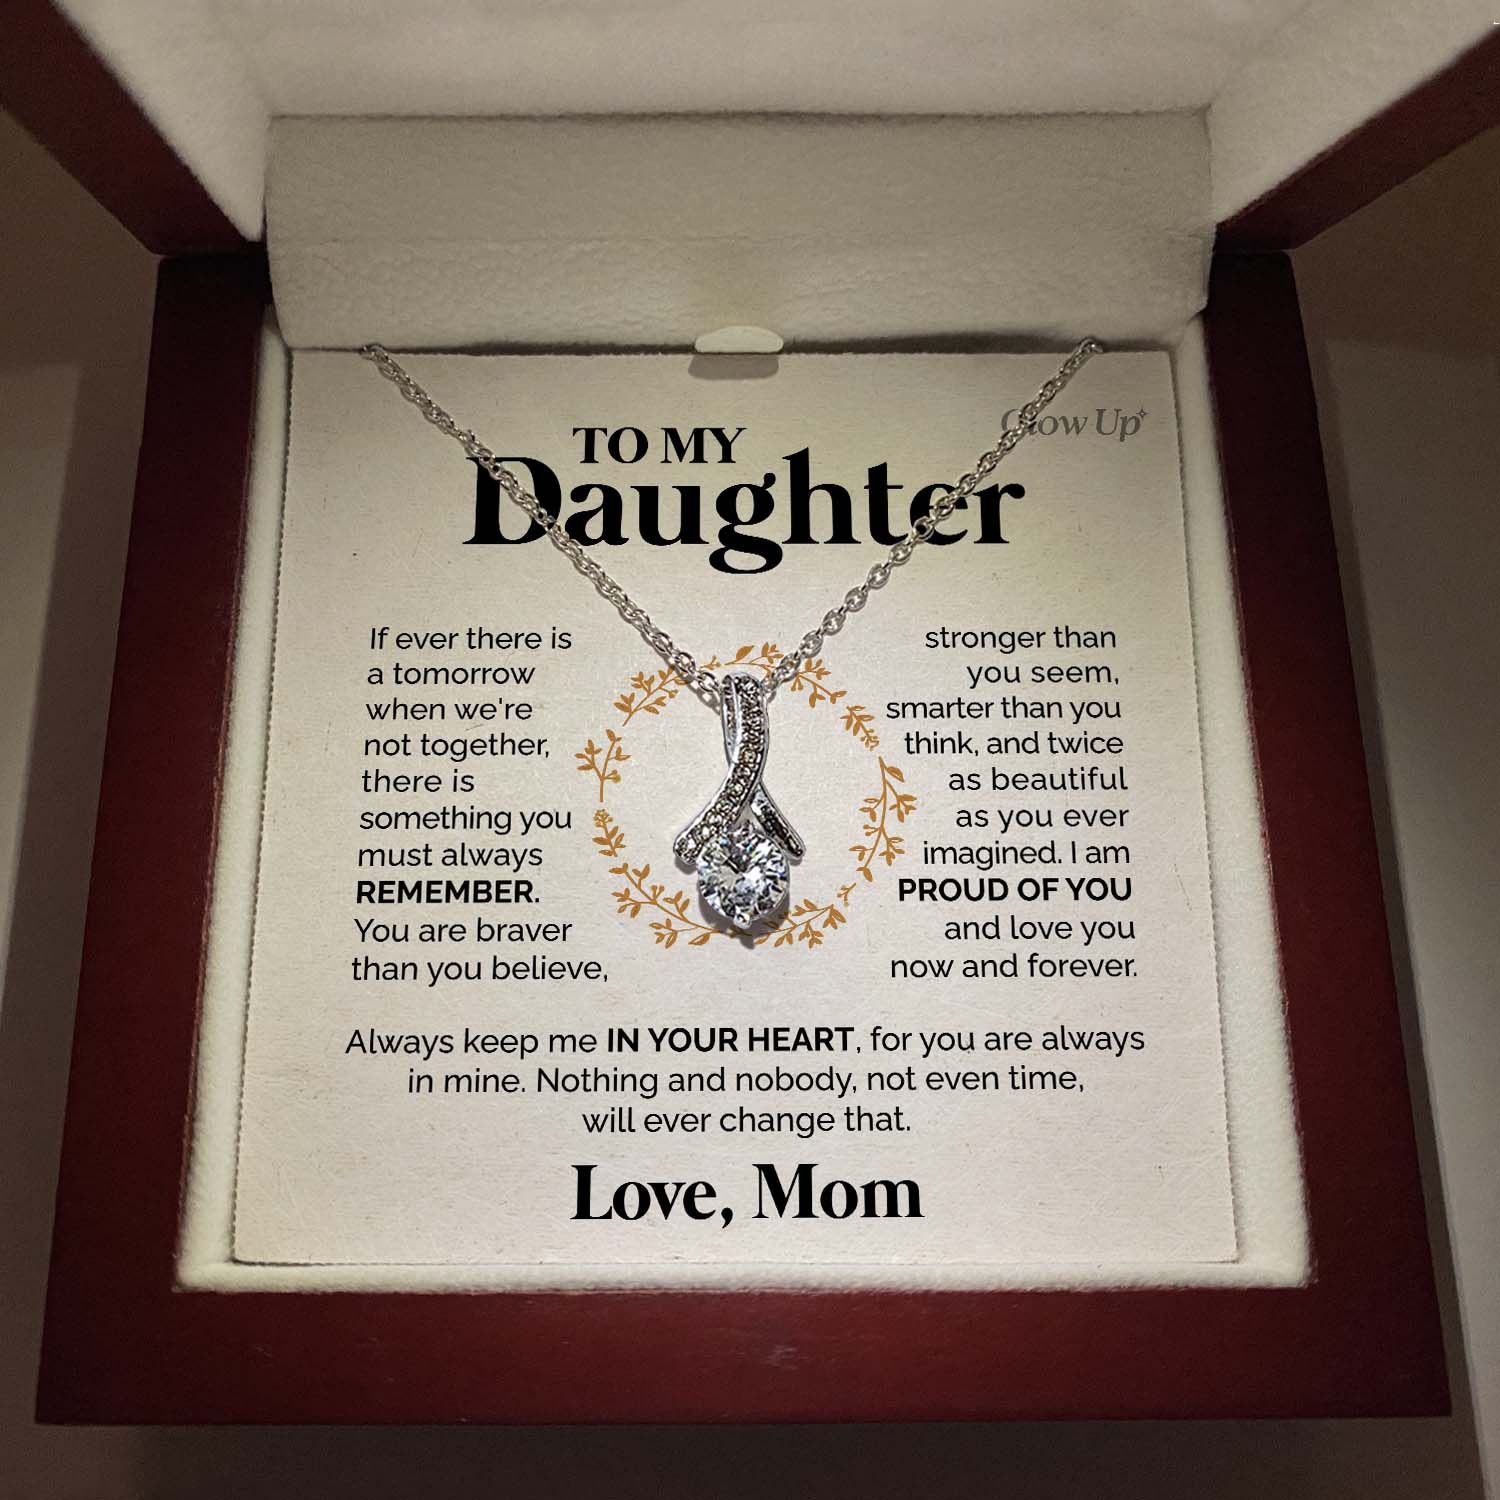 ShineOn Fulfillment Jewelry 14K White Gold Finish / Luxury LED Box To my Daughter - I am proud of you - Ribbon Necklace